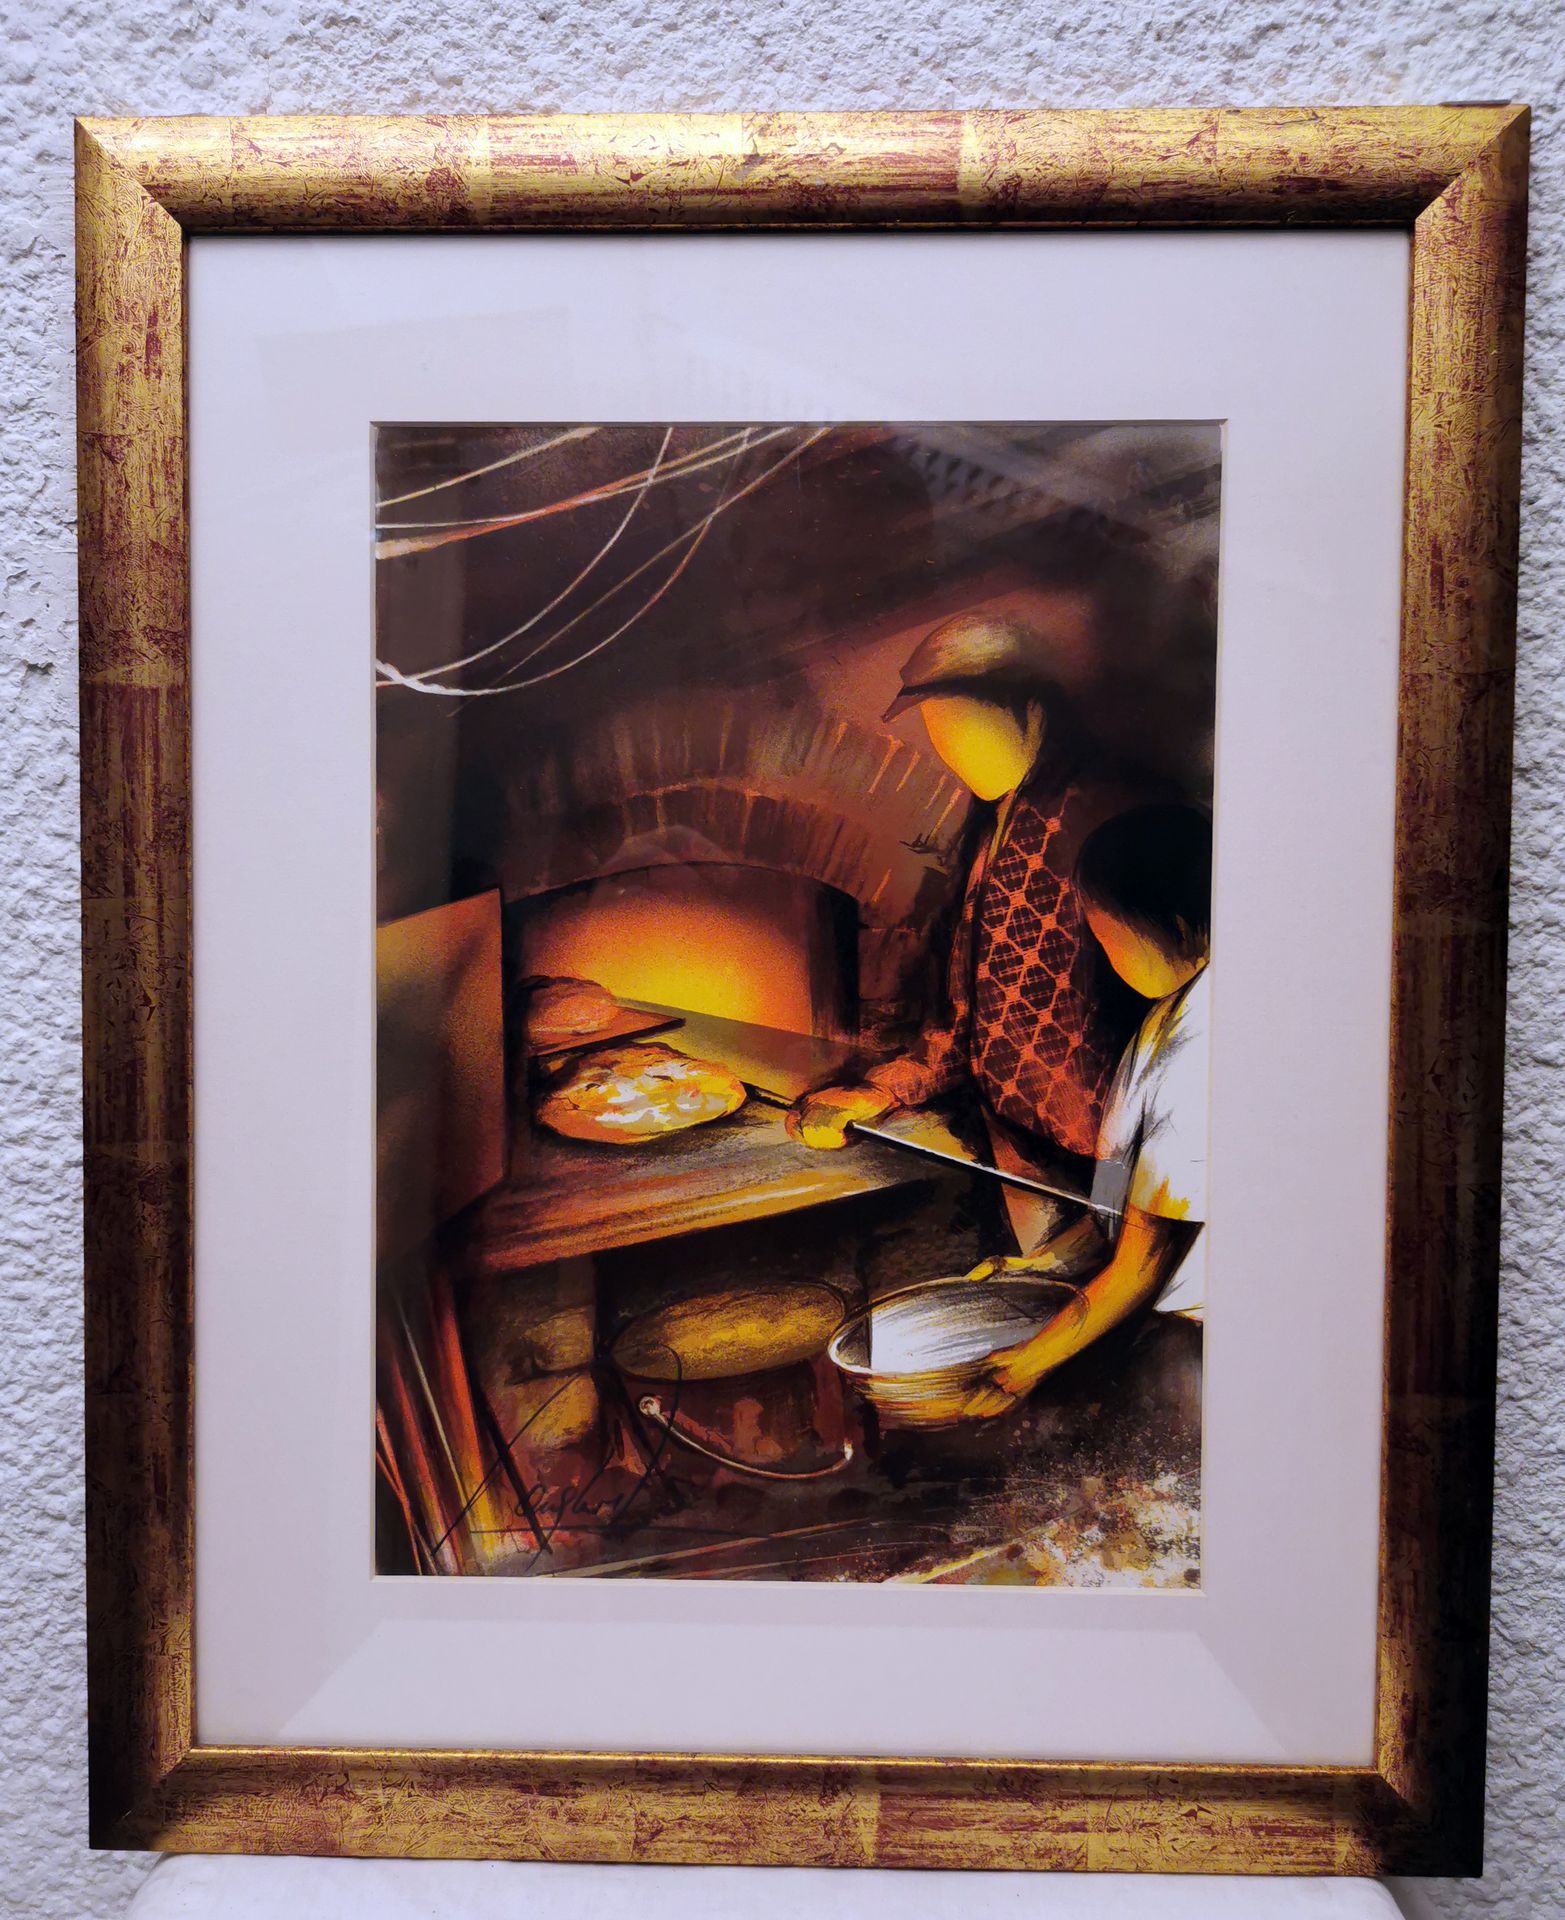 Raymond Poulet RAYMOND POULET SBG "THE POTTER" LITHOGRAPH WITHOUT FRAME 38X28 FR&hellip;